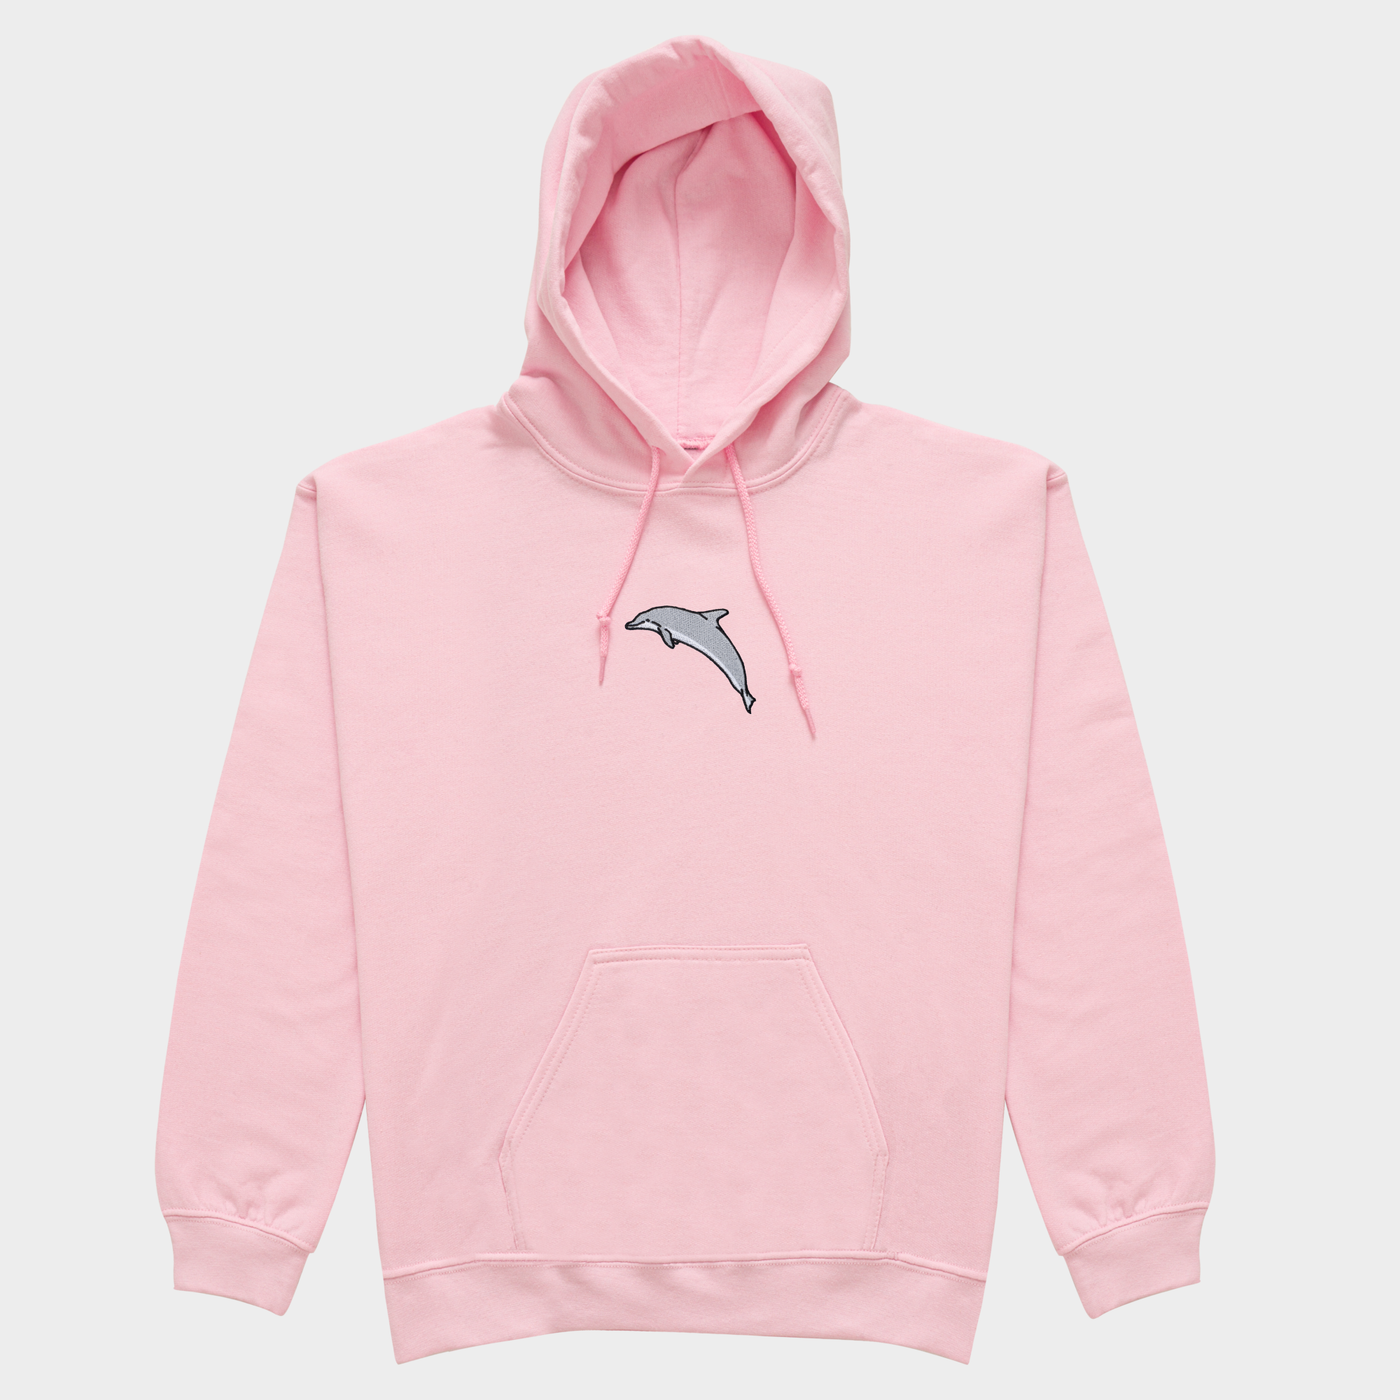 Bobby's Planet Women's Embroidered Dolphin Hoodie from Seven Seas Fish Animals Collection in Light Pink Color#color_light-pink